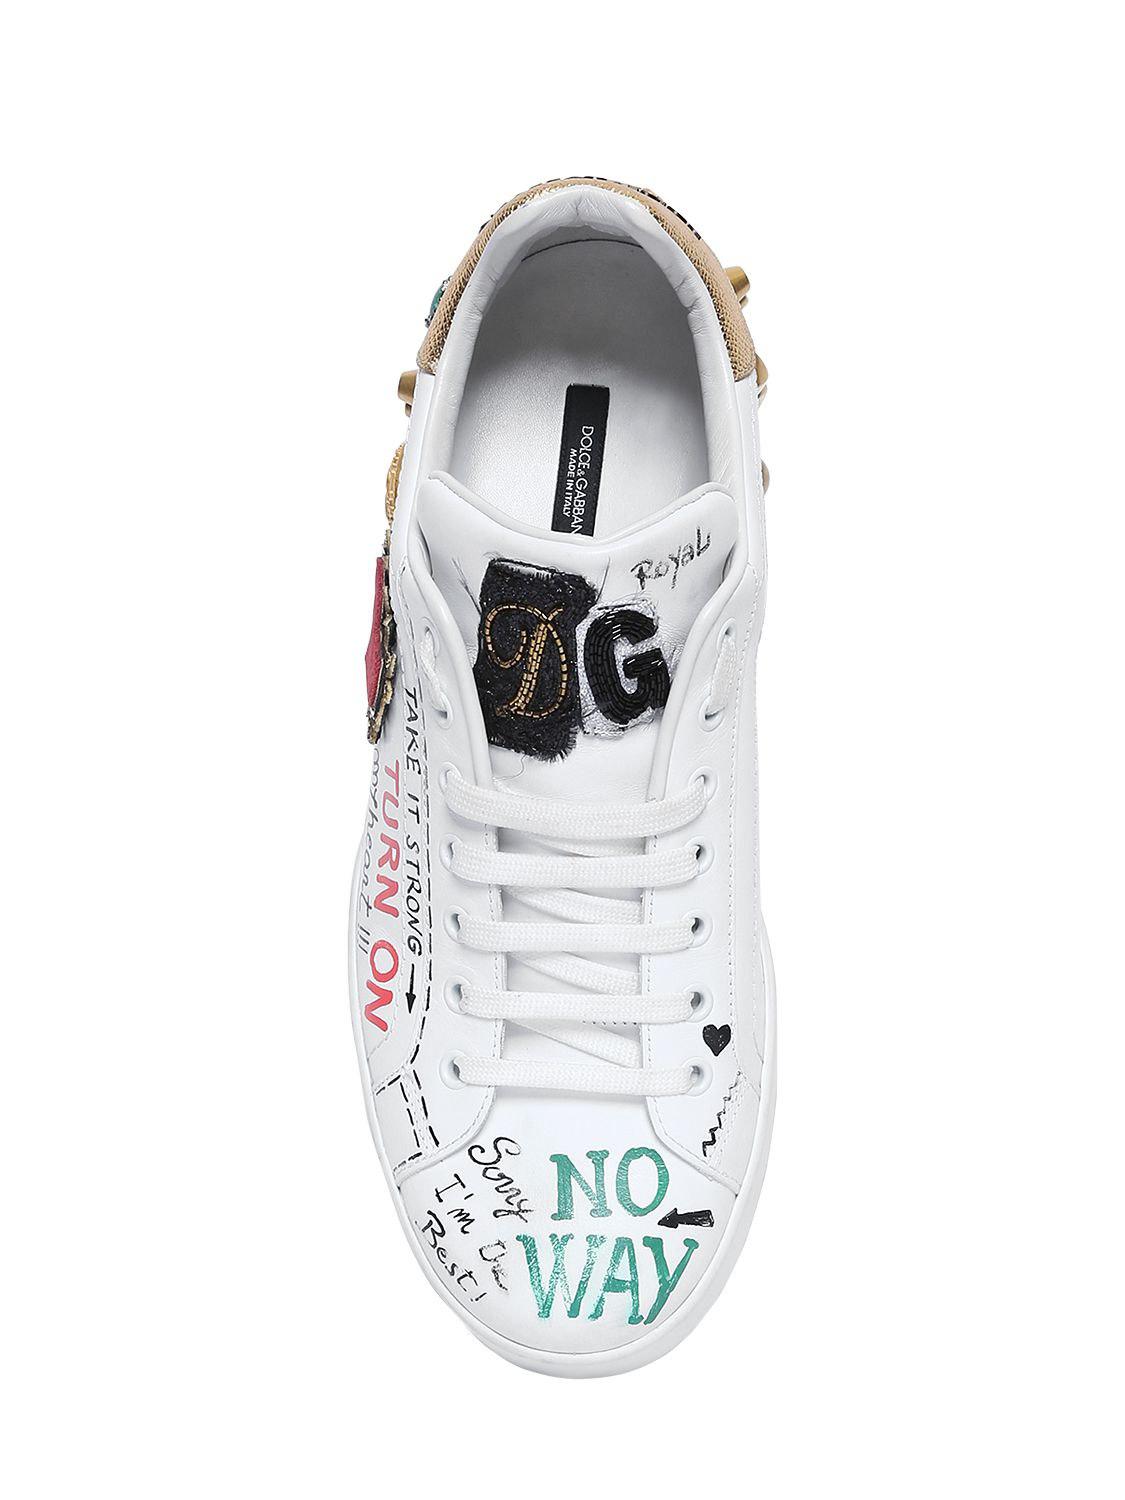 Download Dolce & Gabbana Embellished Leather Sneakers in White - Lyst